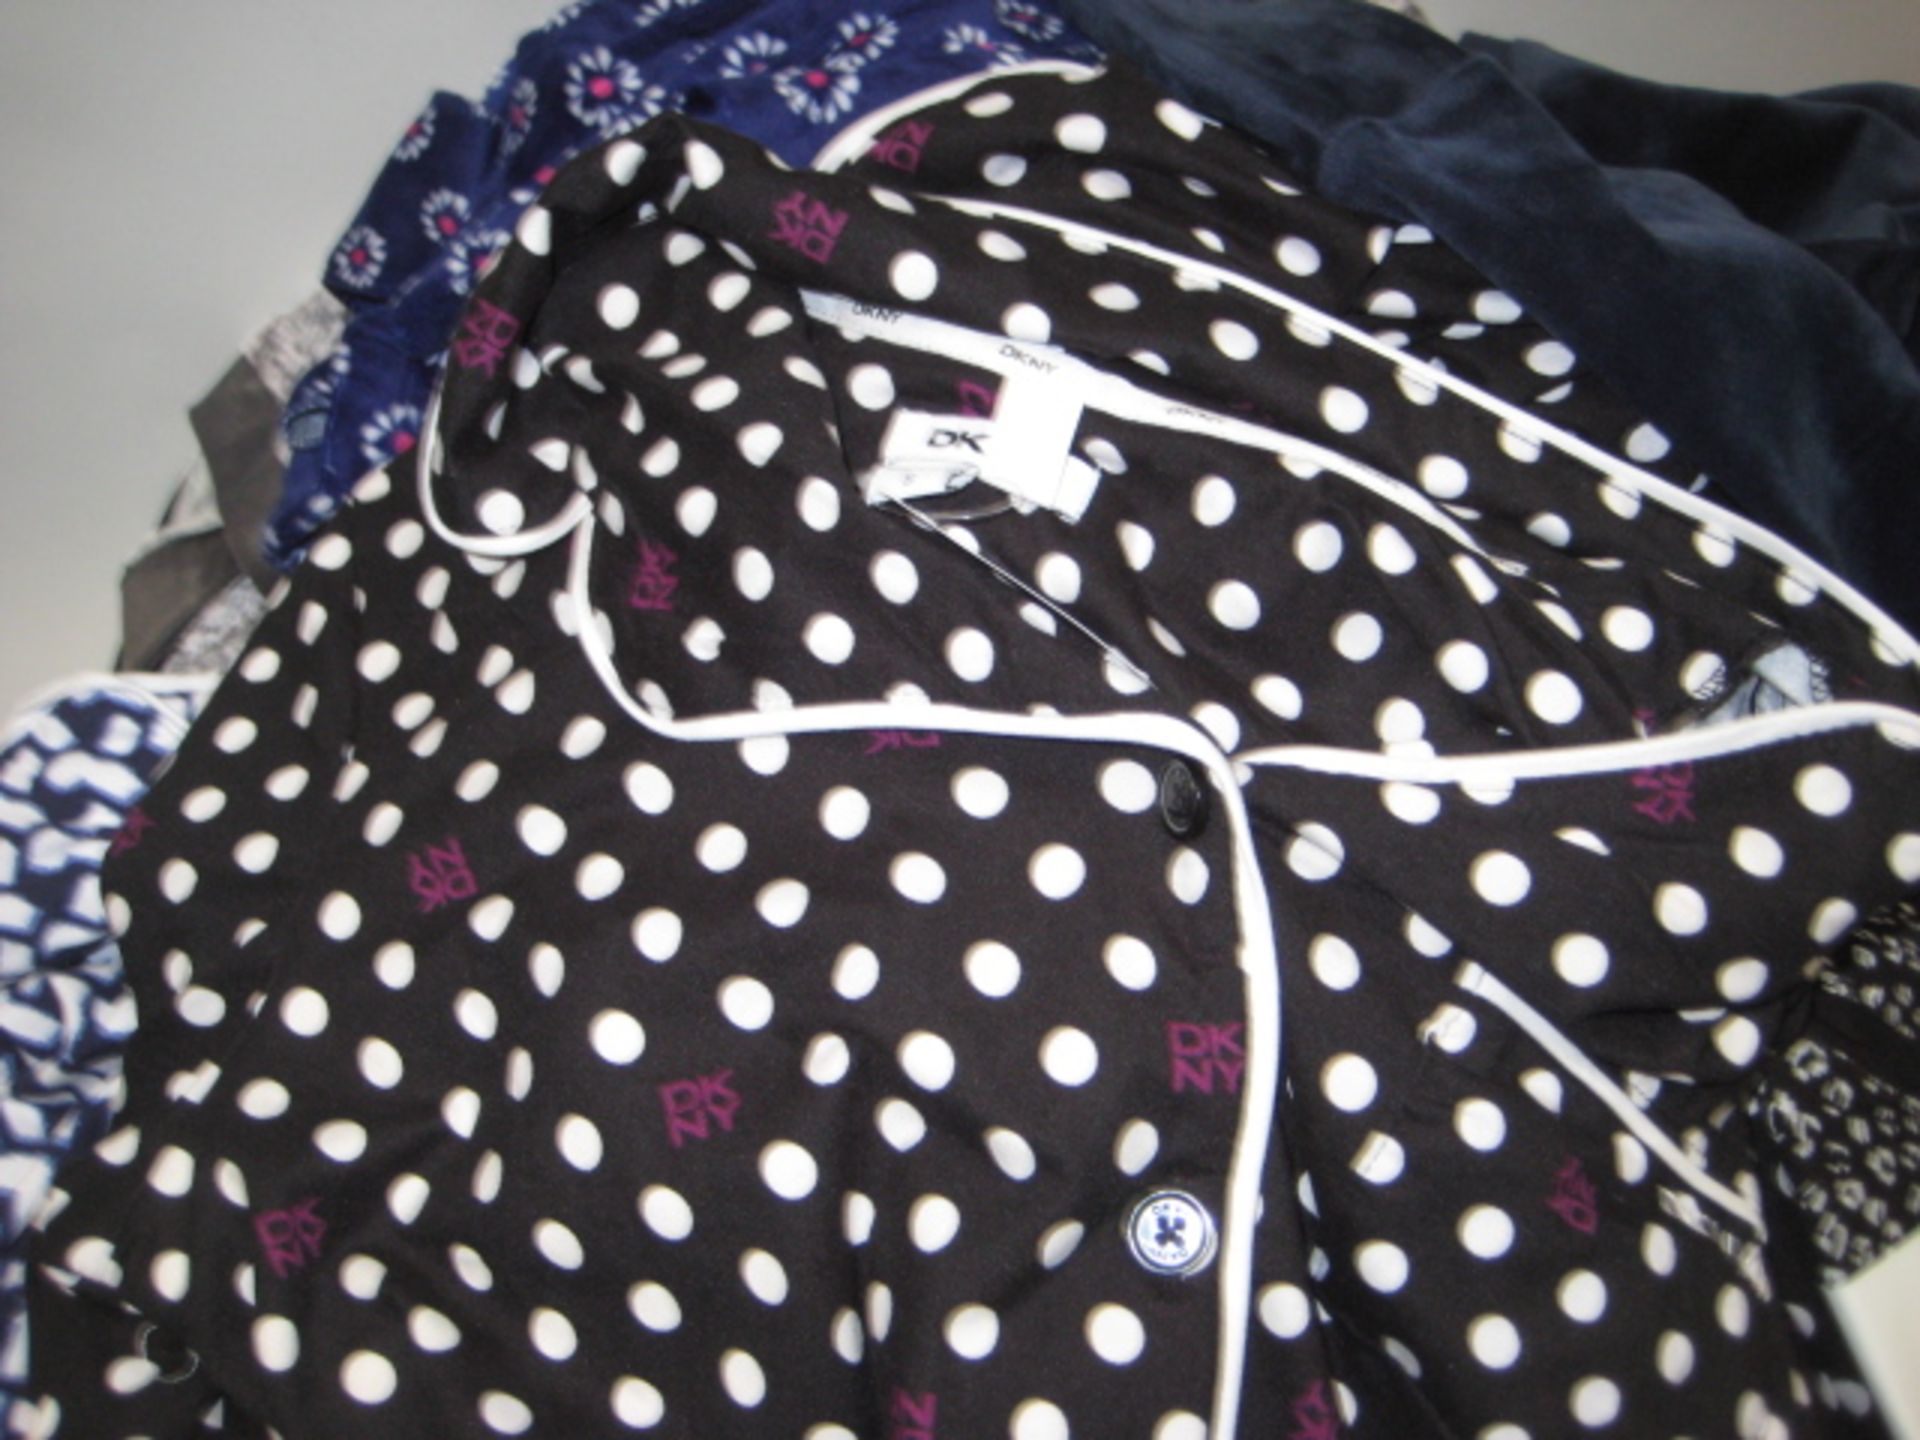 Large bag of ladies lounge wear, Pjs, etc by DKNY, 32 Degree cool, in various colours, polka dot - Image 3 of 3